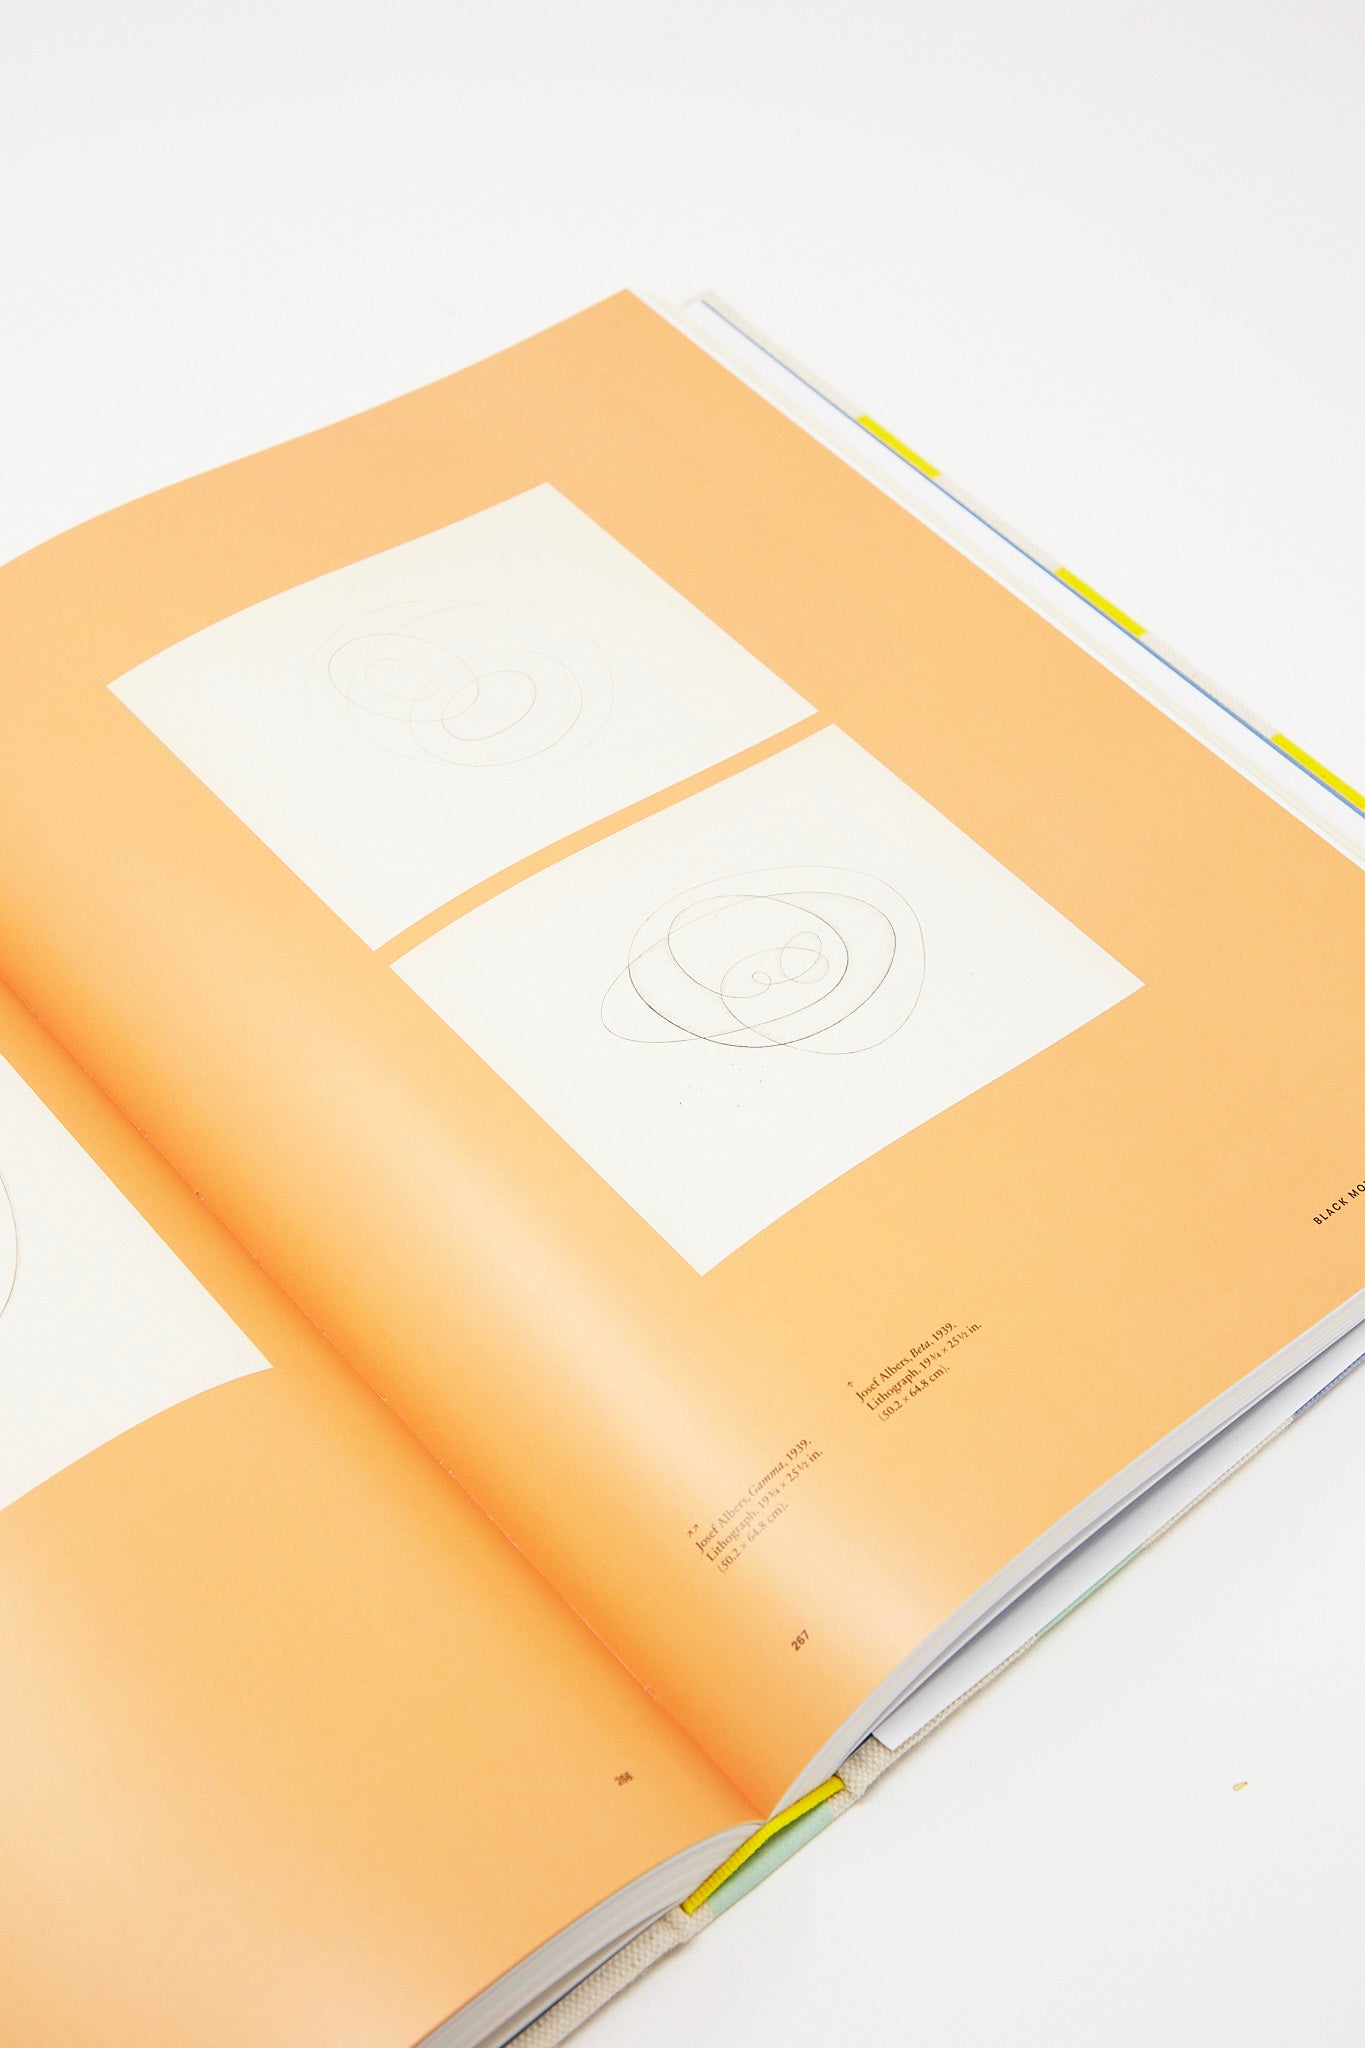 An open hardcover book with drawings by Anni & Josef Albers: Equal and Unequal, published by Phaidon.